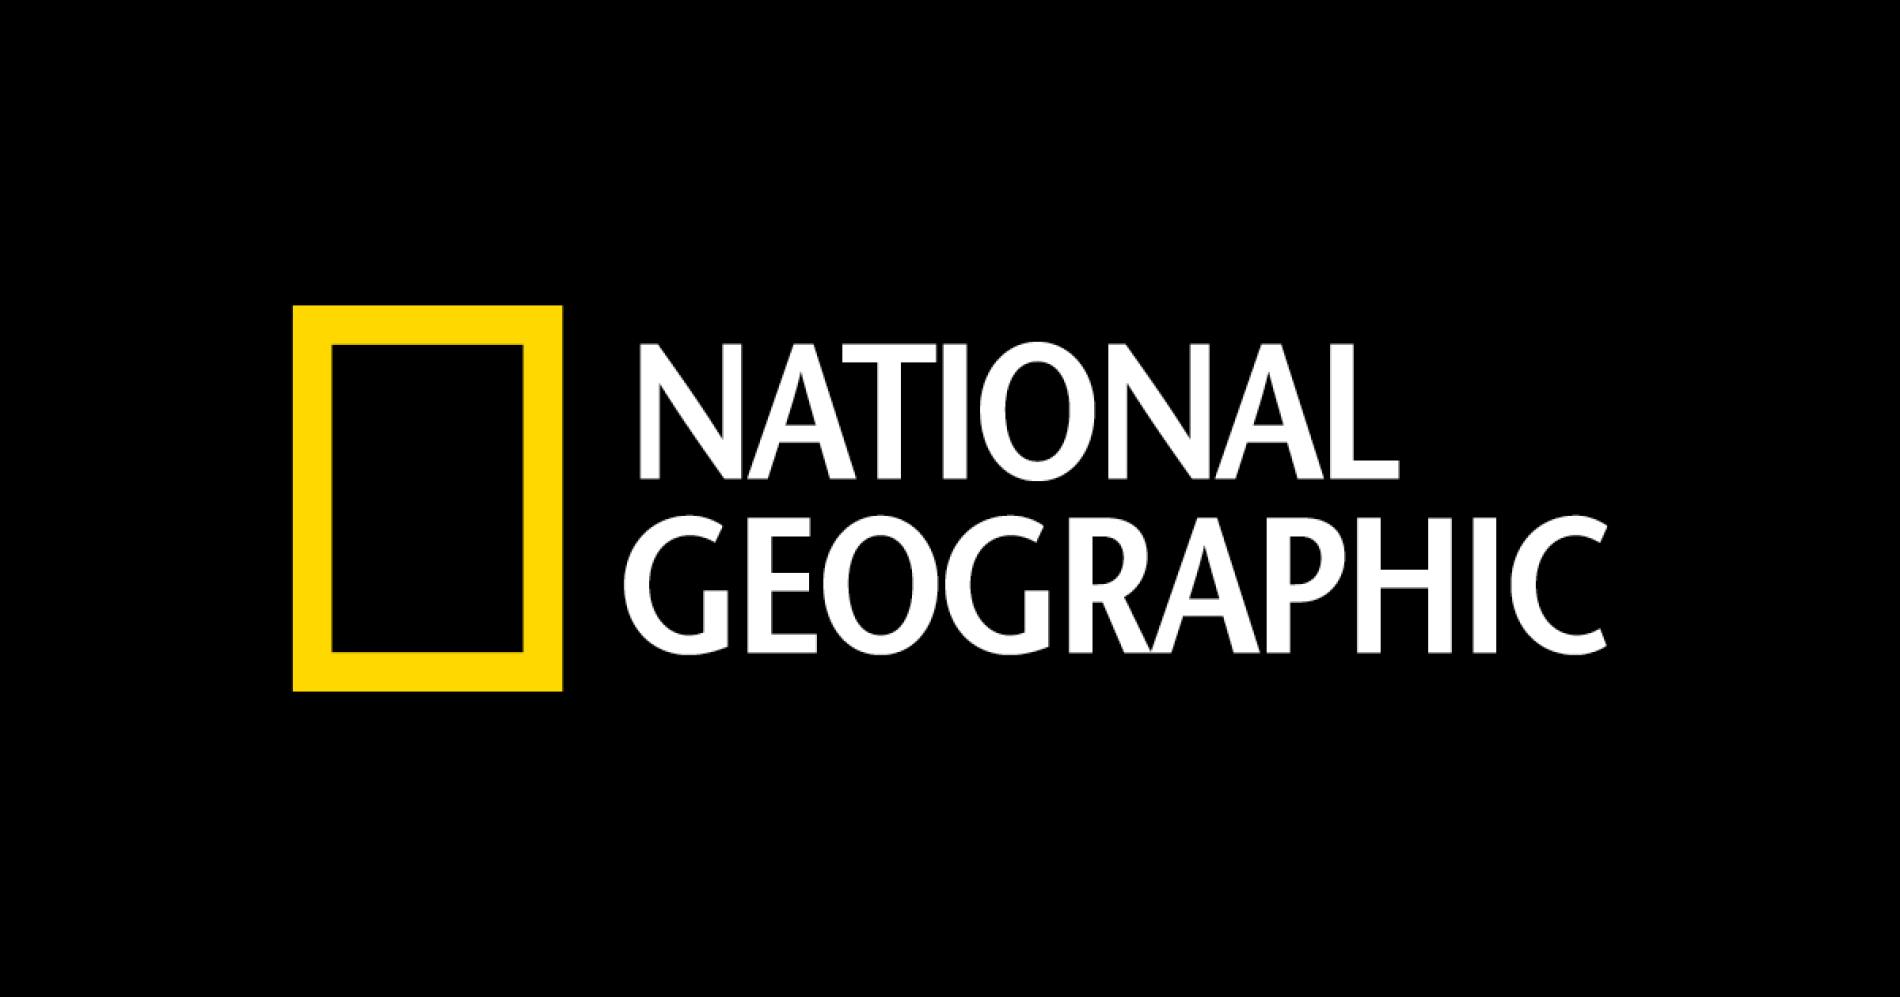 National Geographic Logo Png Hdpng.com 1900 - National Geographic, Transparent background PNG HD thumbnail